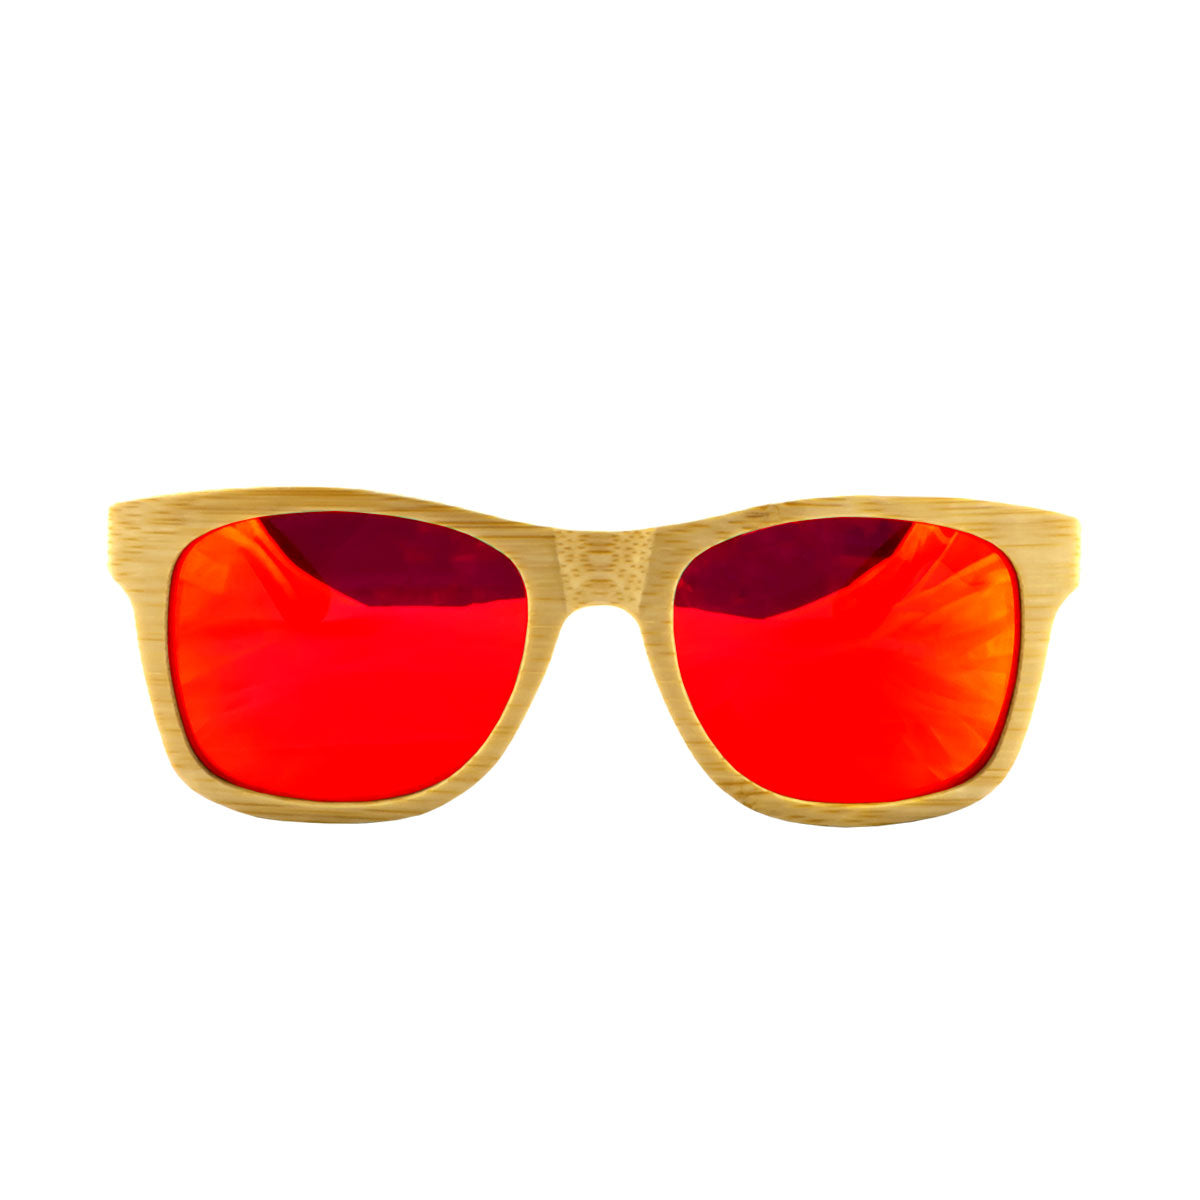 Bamboo Wood Sunglasses, Red Mirror Lens